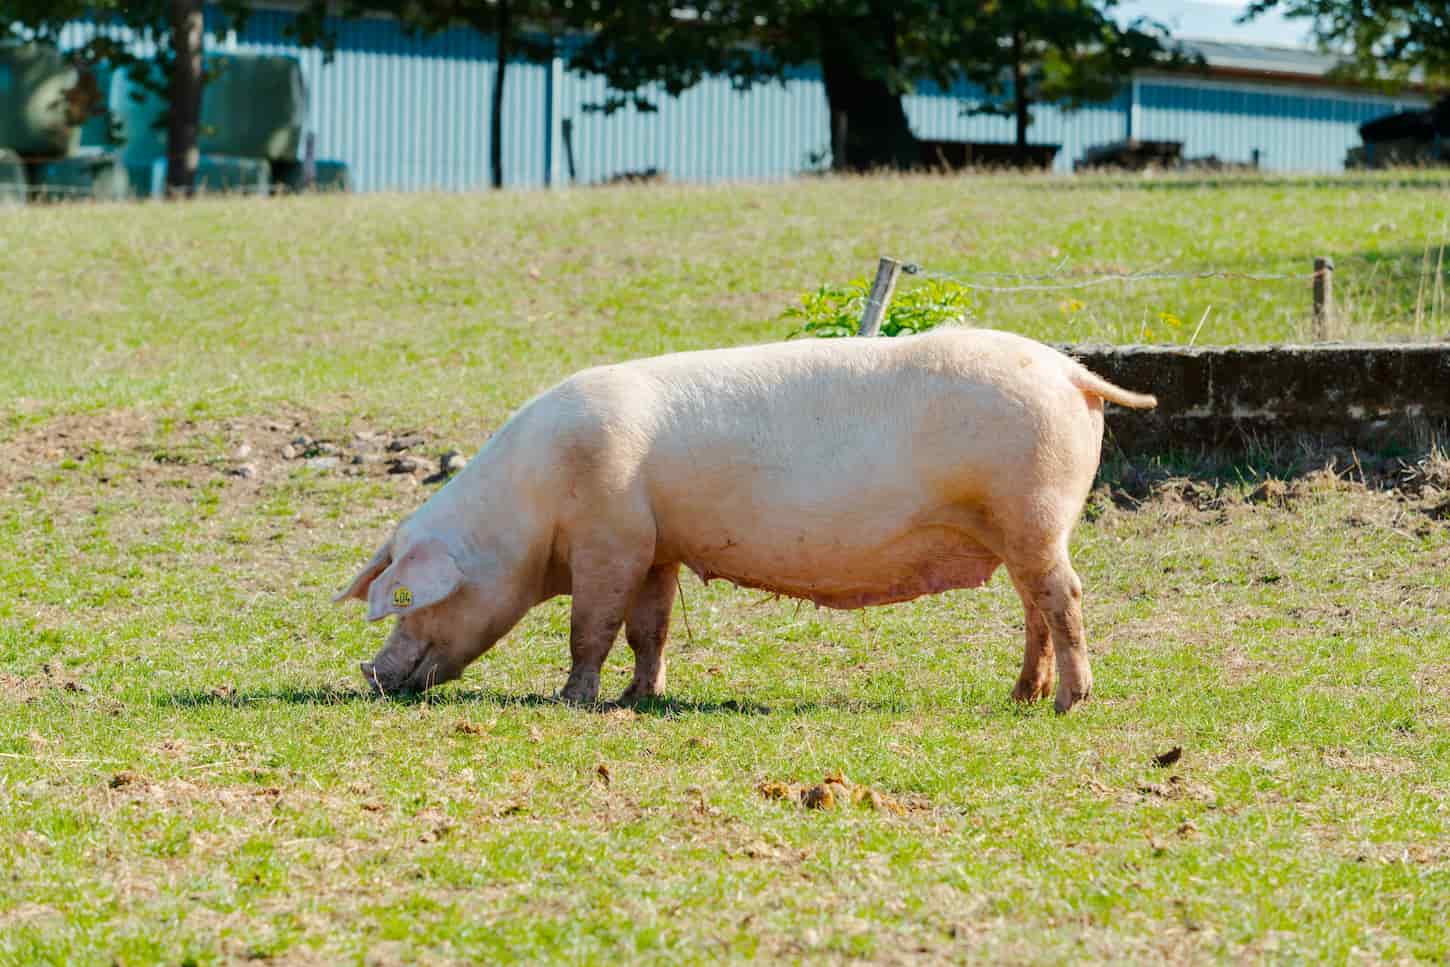 An image of a Healthy pig in the meadow.